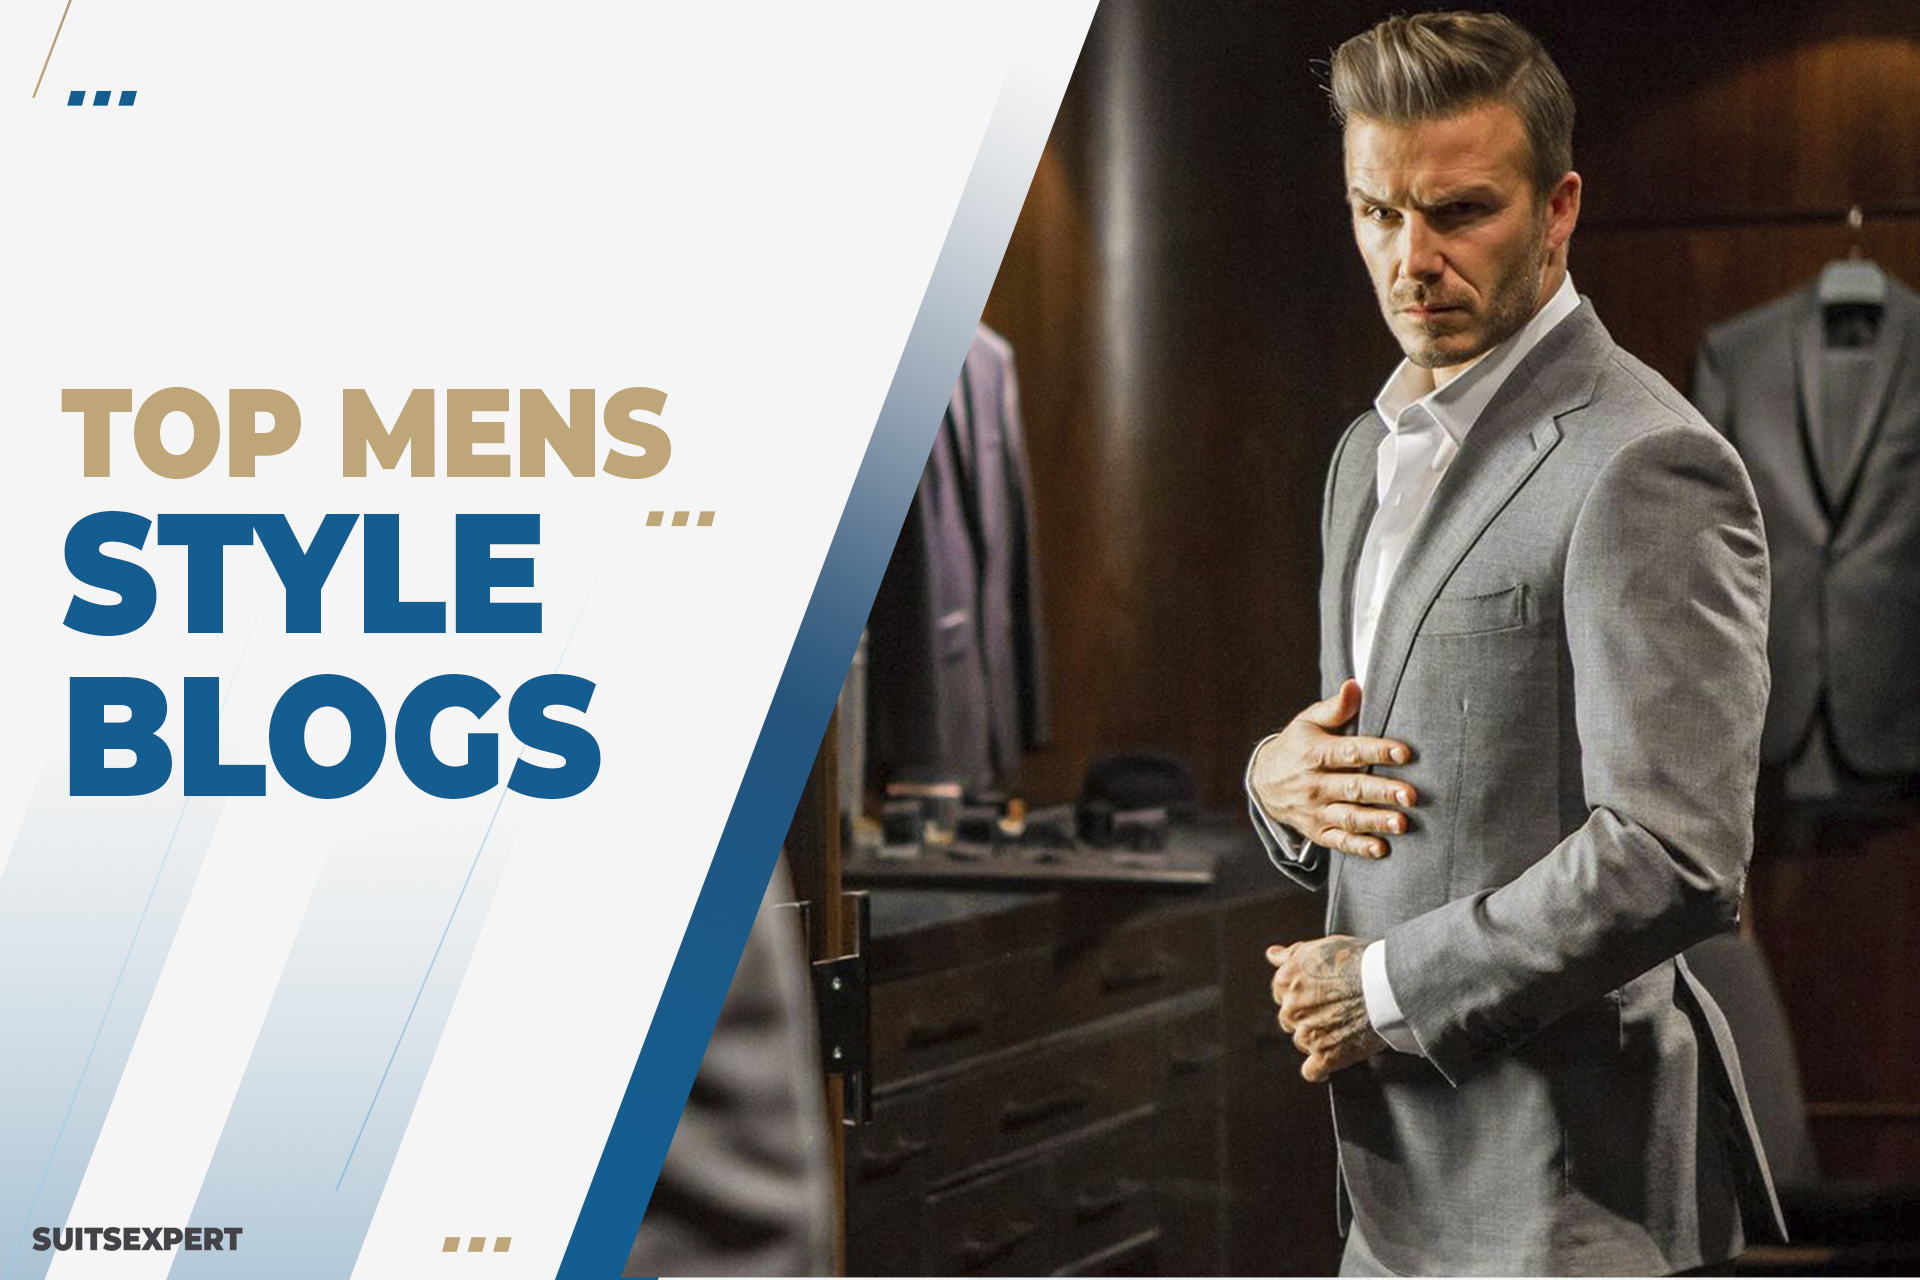 Men's Shorts Style Guide  How To Wear Shorts The Right Way - MR KOACHMAN